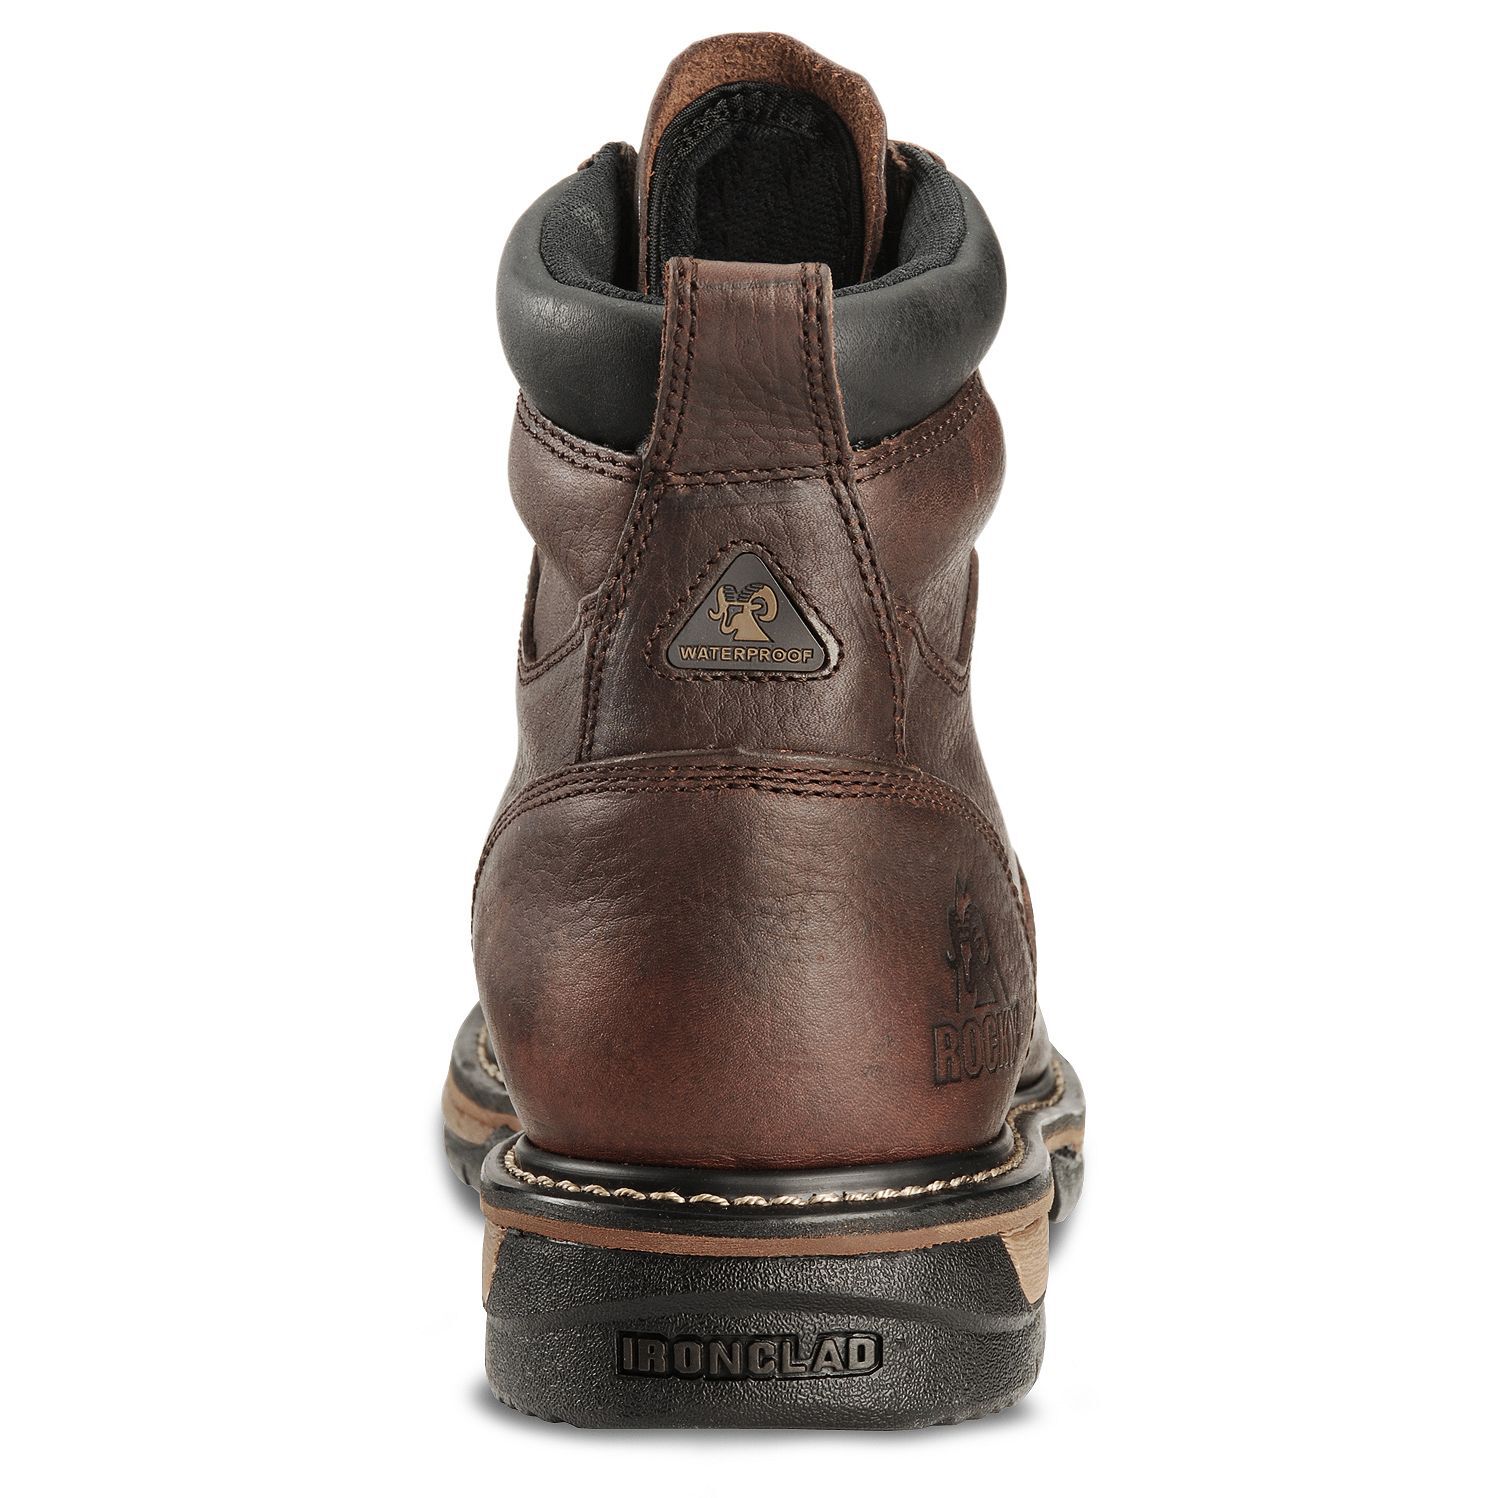 ironclad work boots